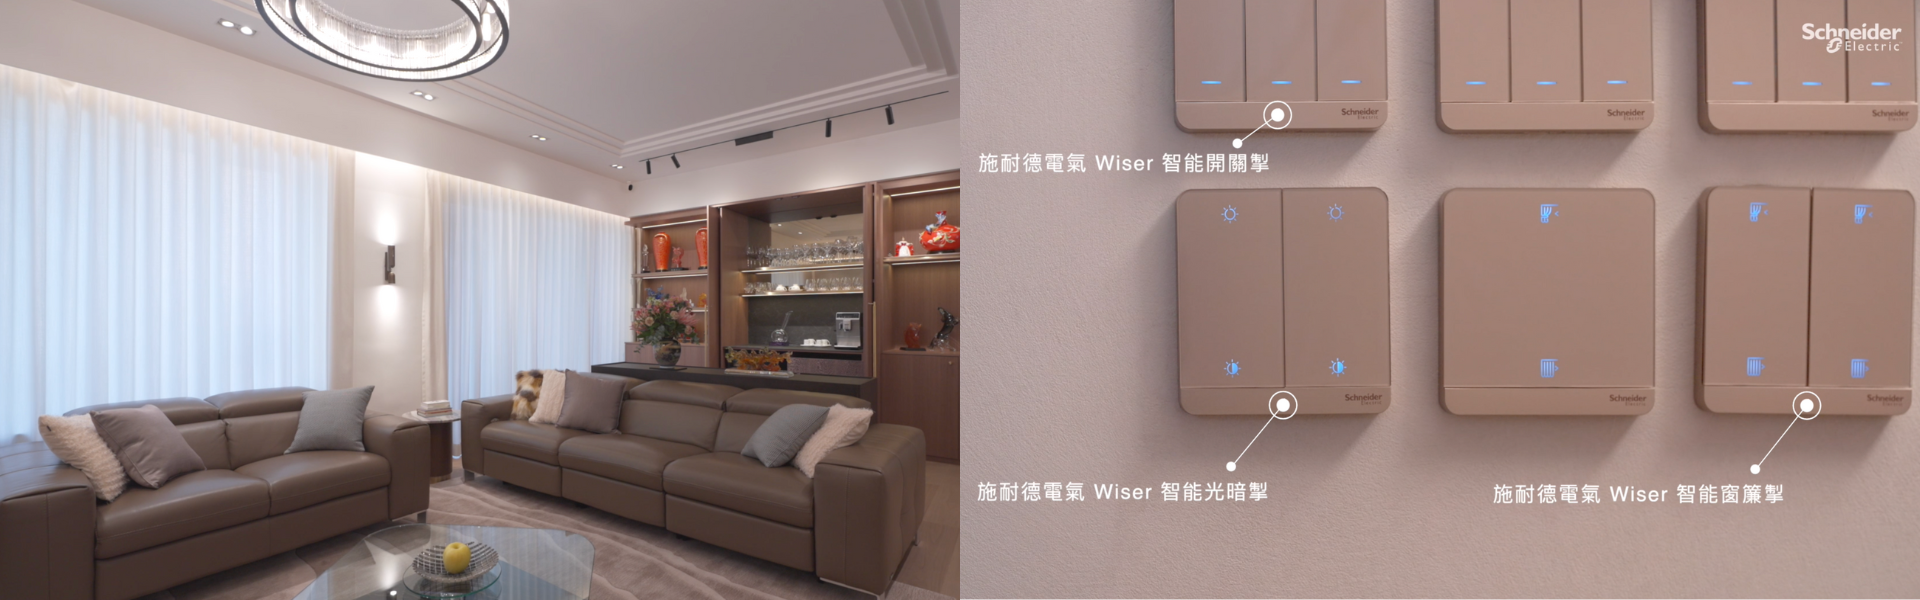 Schneider Electric's Wiser Smart Home Solution: The Top Choice for Seniors Looking for a Smarter Lifestyle 